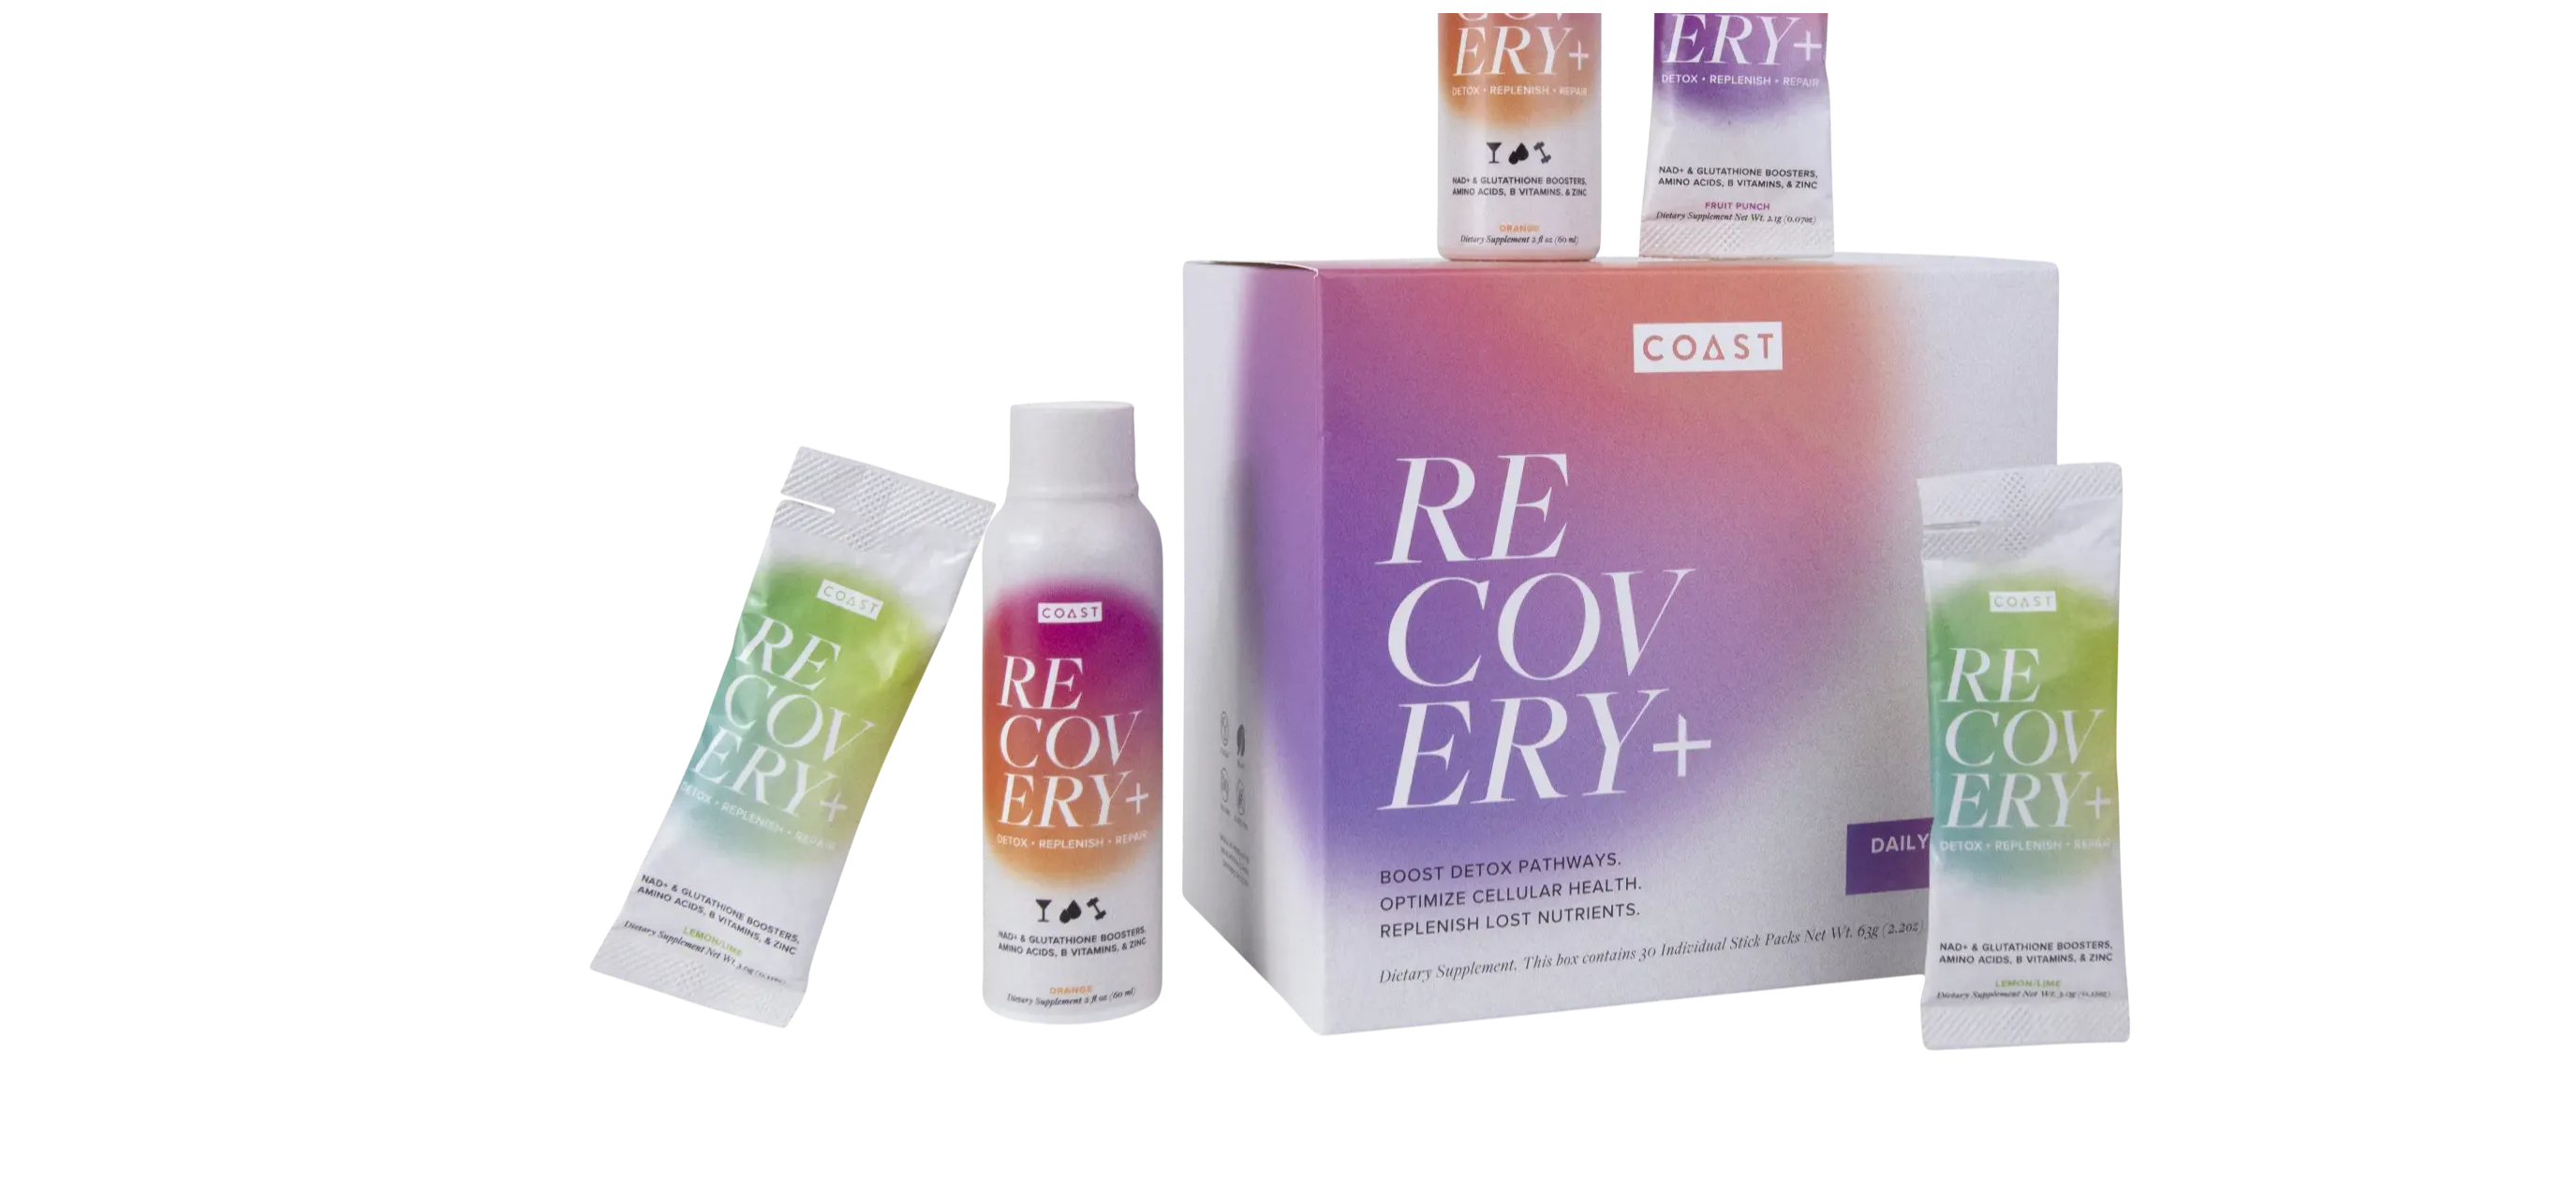 COAST Recovery+ powder sticks and shots. Daily recovery for biohacking with NAD+, glutathione, glucarate, antioxidants, B-complex, taurine, zinc. Detox, cellular optimization, replenish nutrients. Improve recovery, aid detox, optimize cellular health, energy boost.